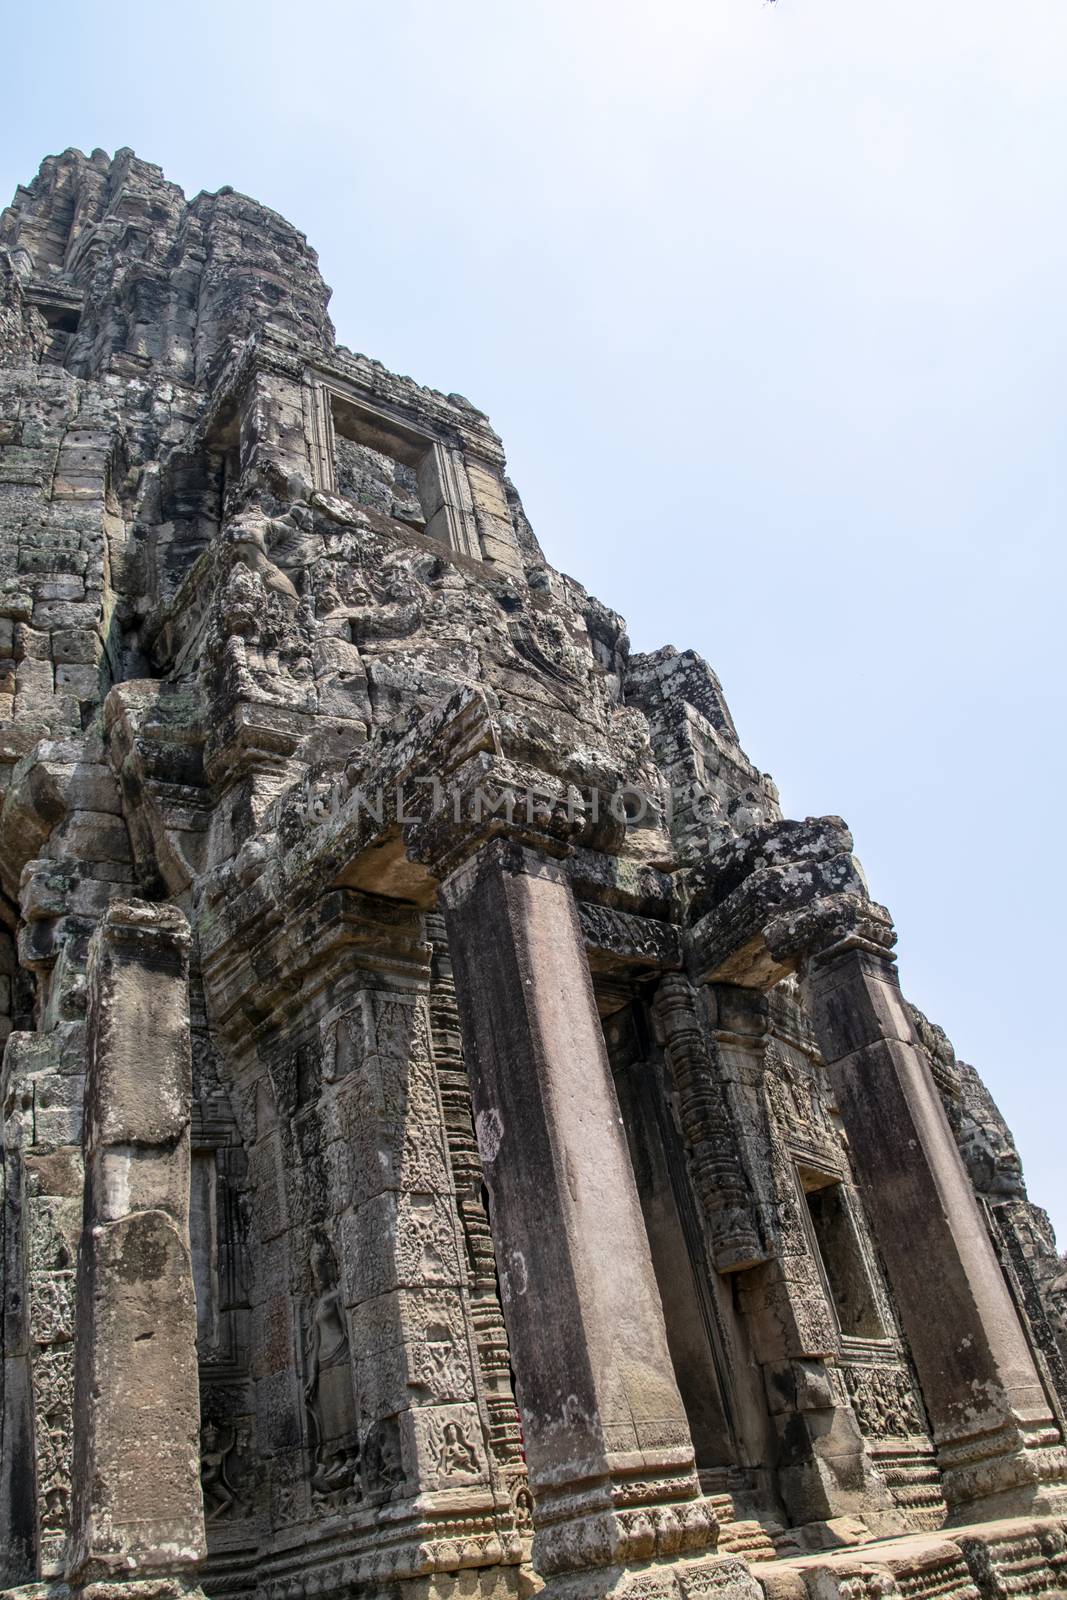 Cambodia, Bayon Temple - March 2016: Bayon is remarkable for the 216 serene and smiling stone faces on the many towers jutting out from the high terrace and cluster around the central peak